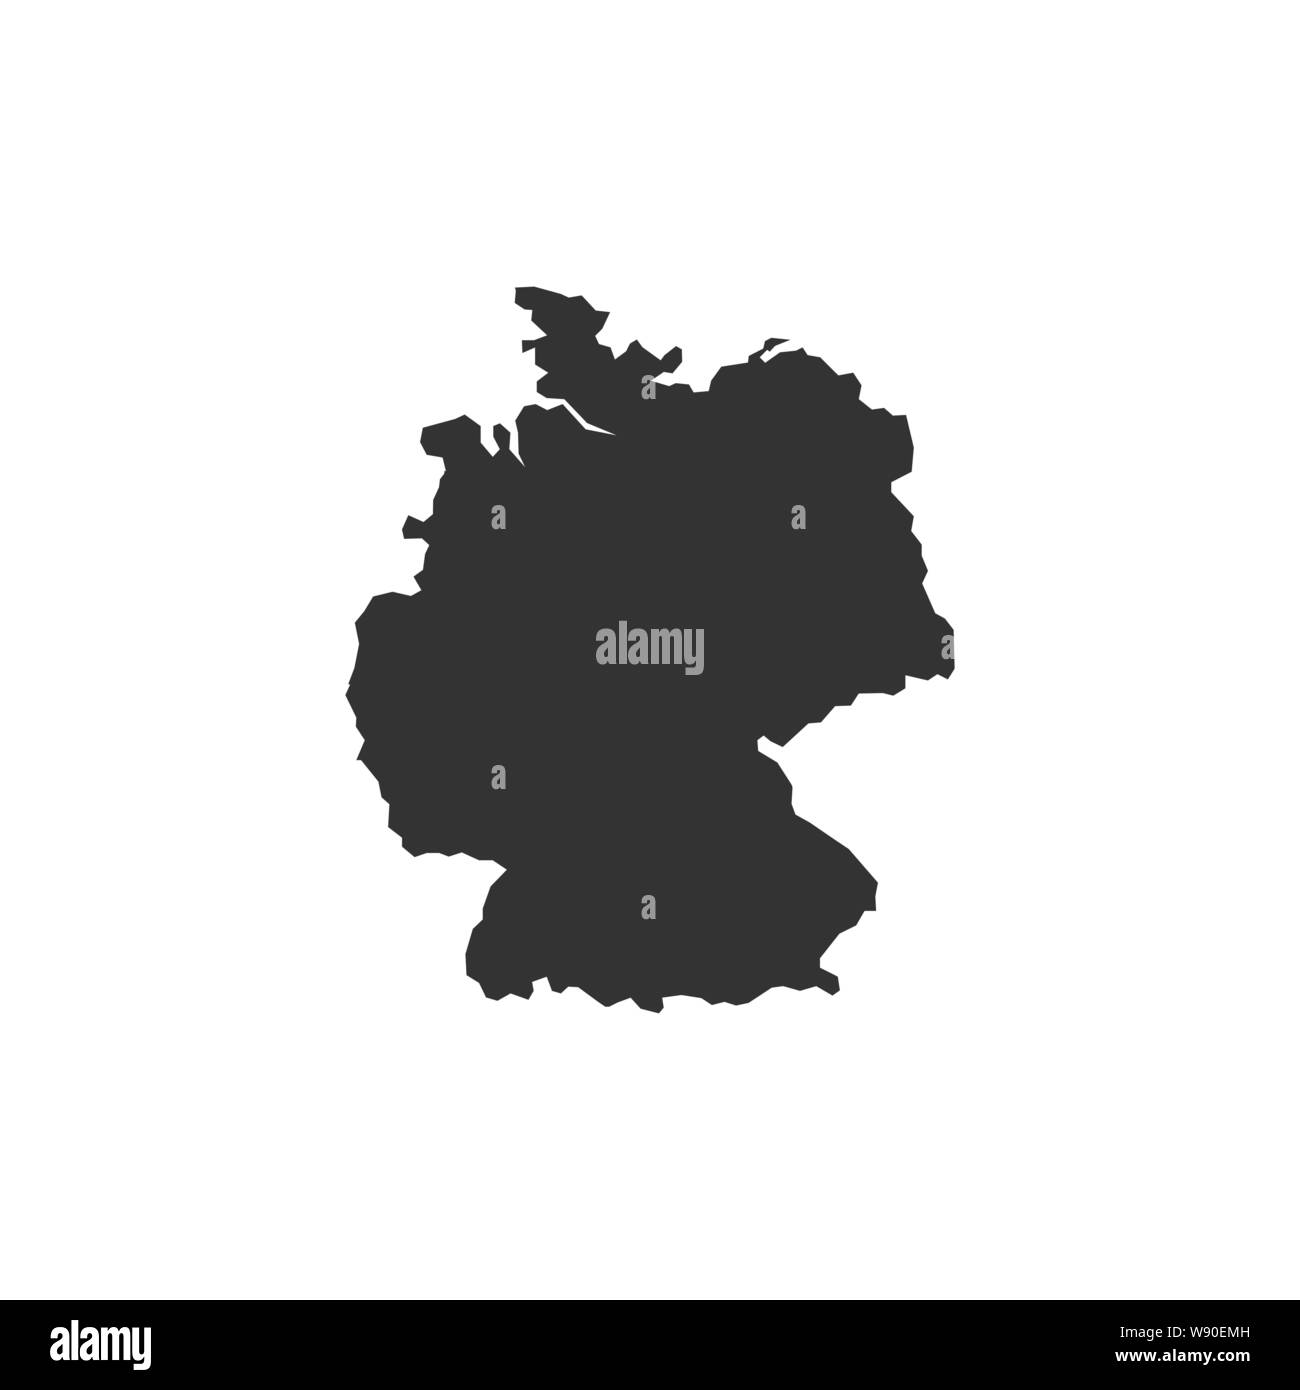 Detailed vector map - Germany - Vector illustration Stock Vector